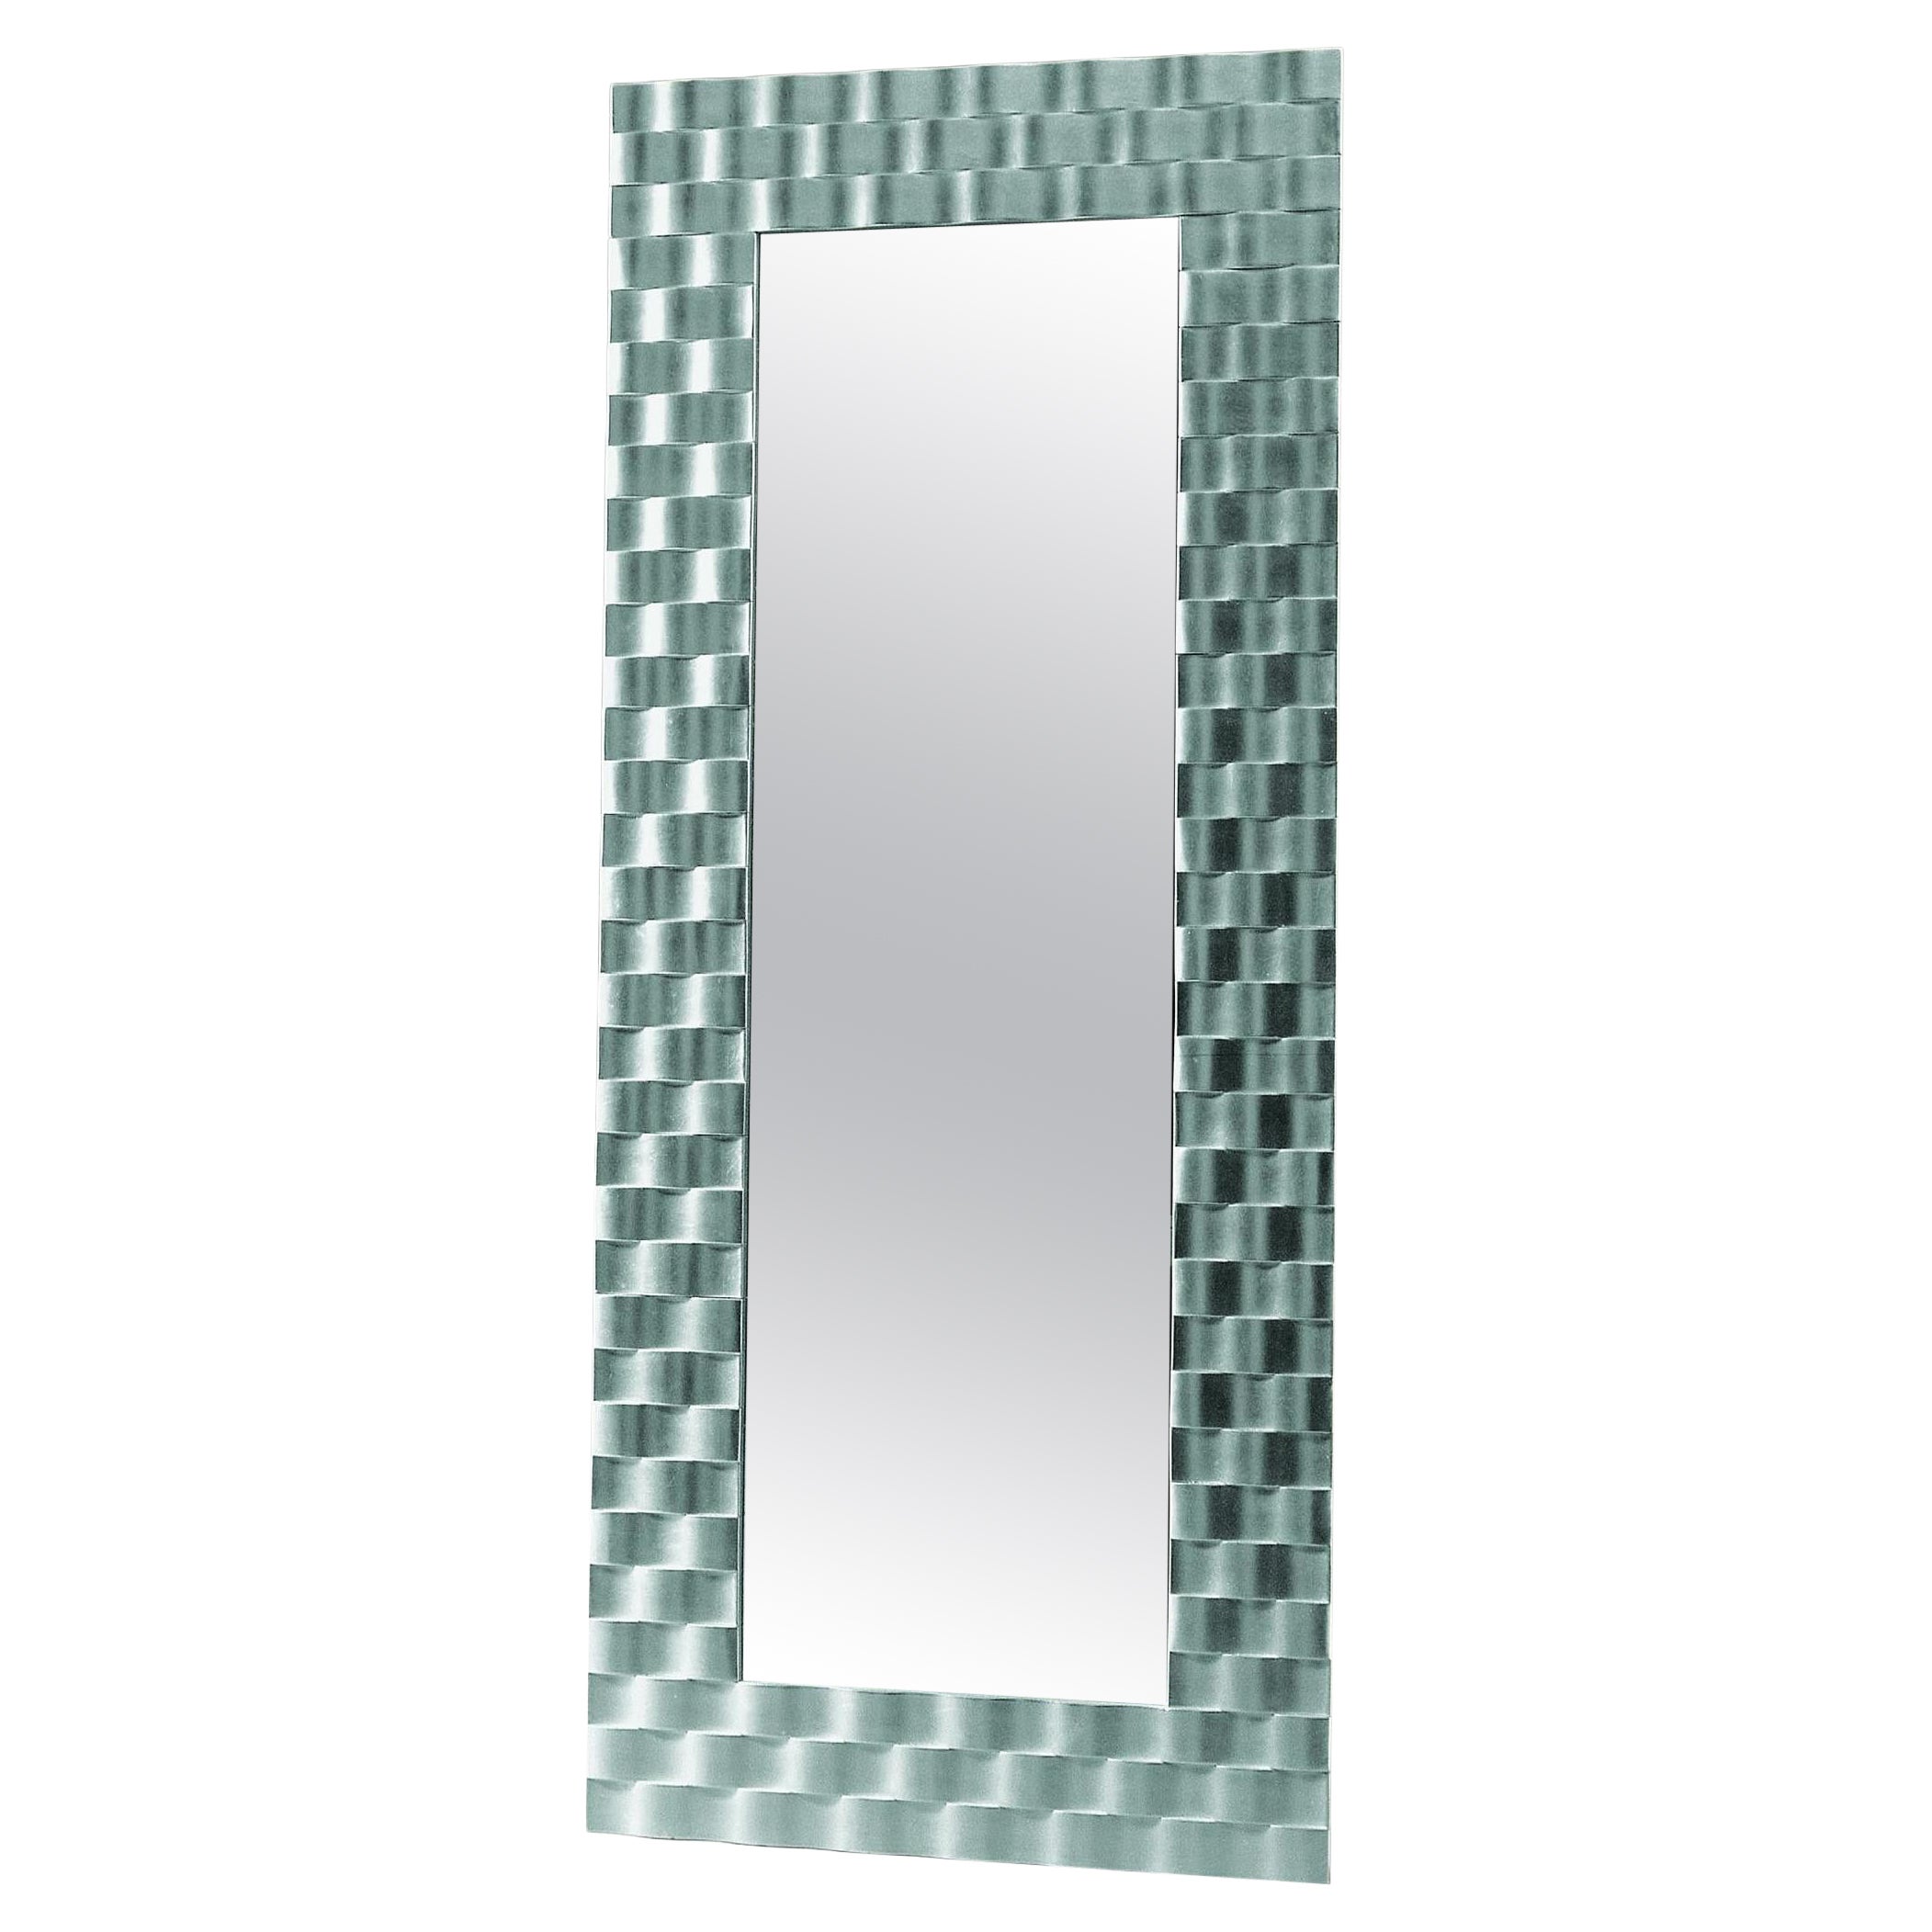 Limited, Orsi, Ava Wooden Mirror, Silver Foil